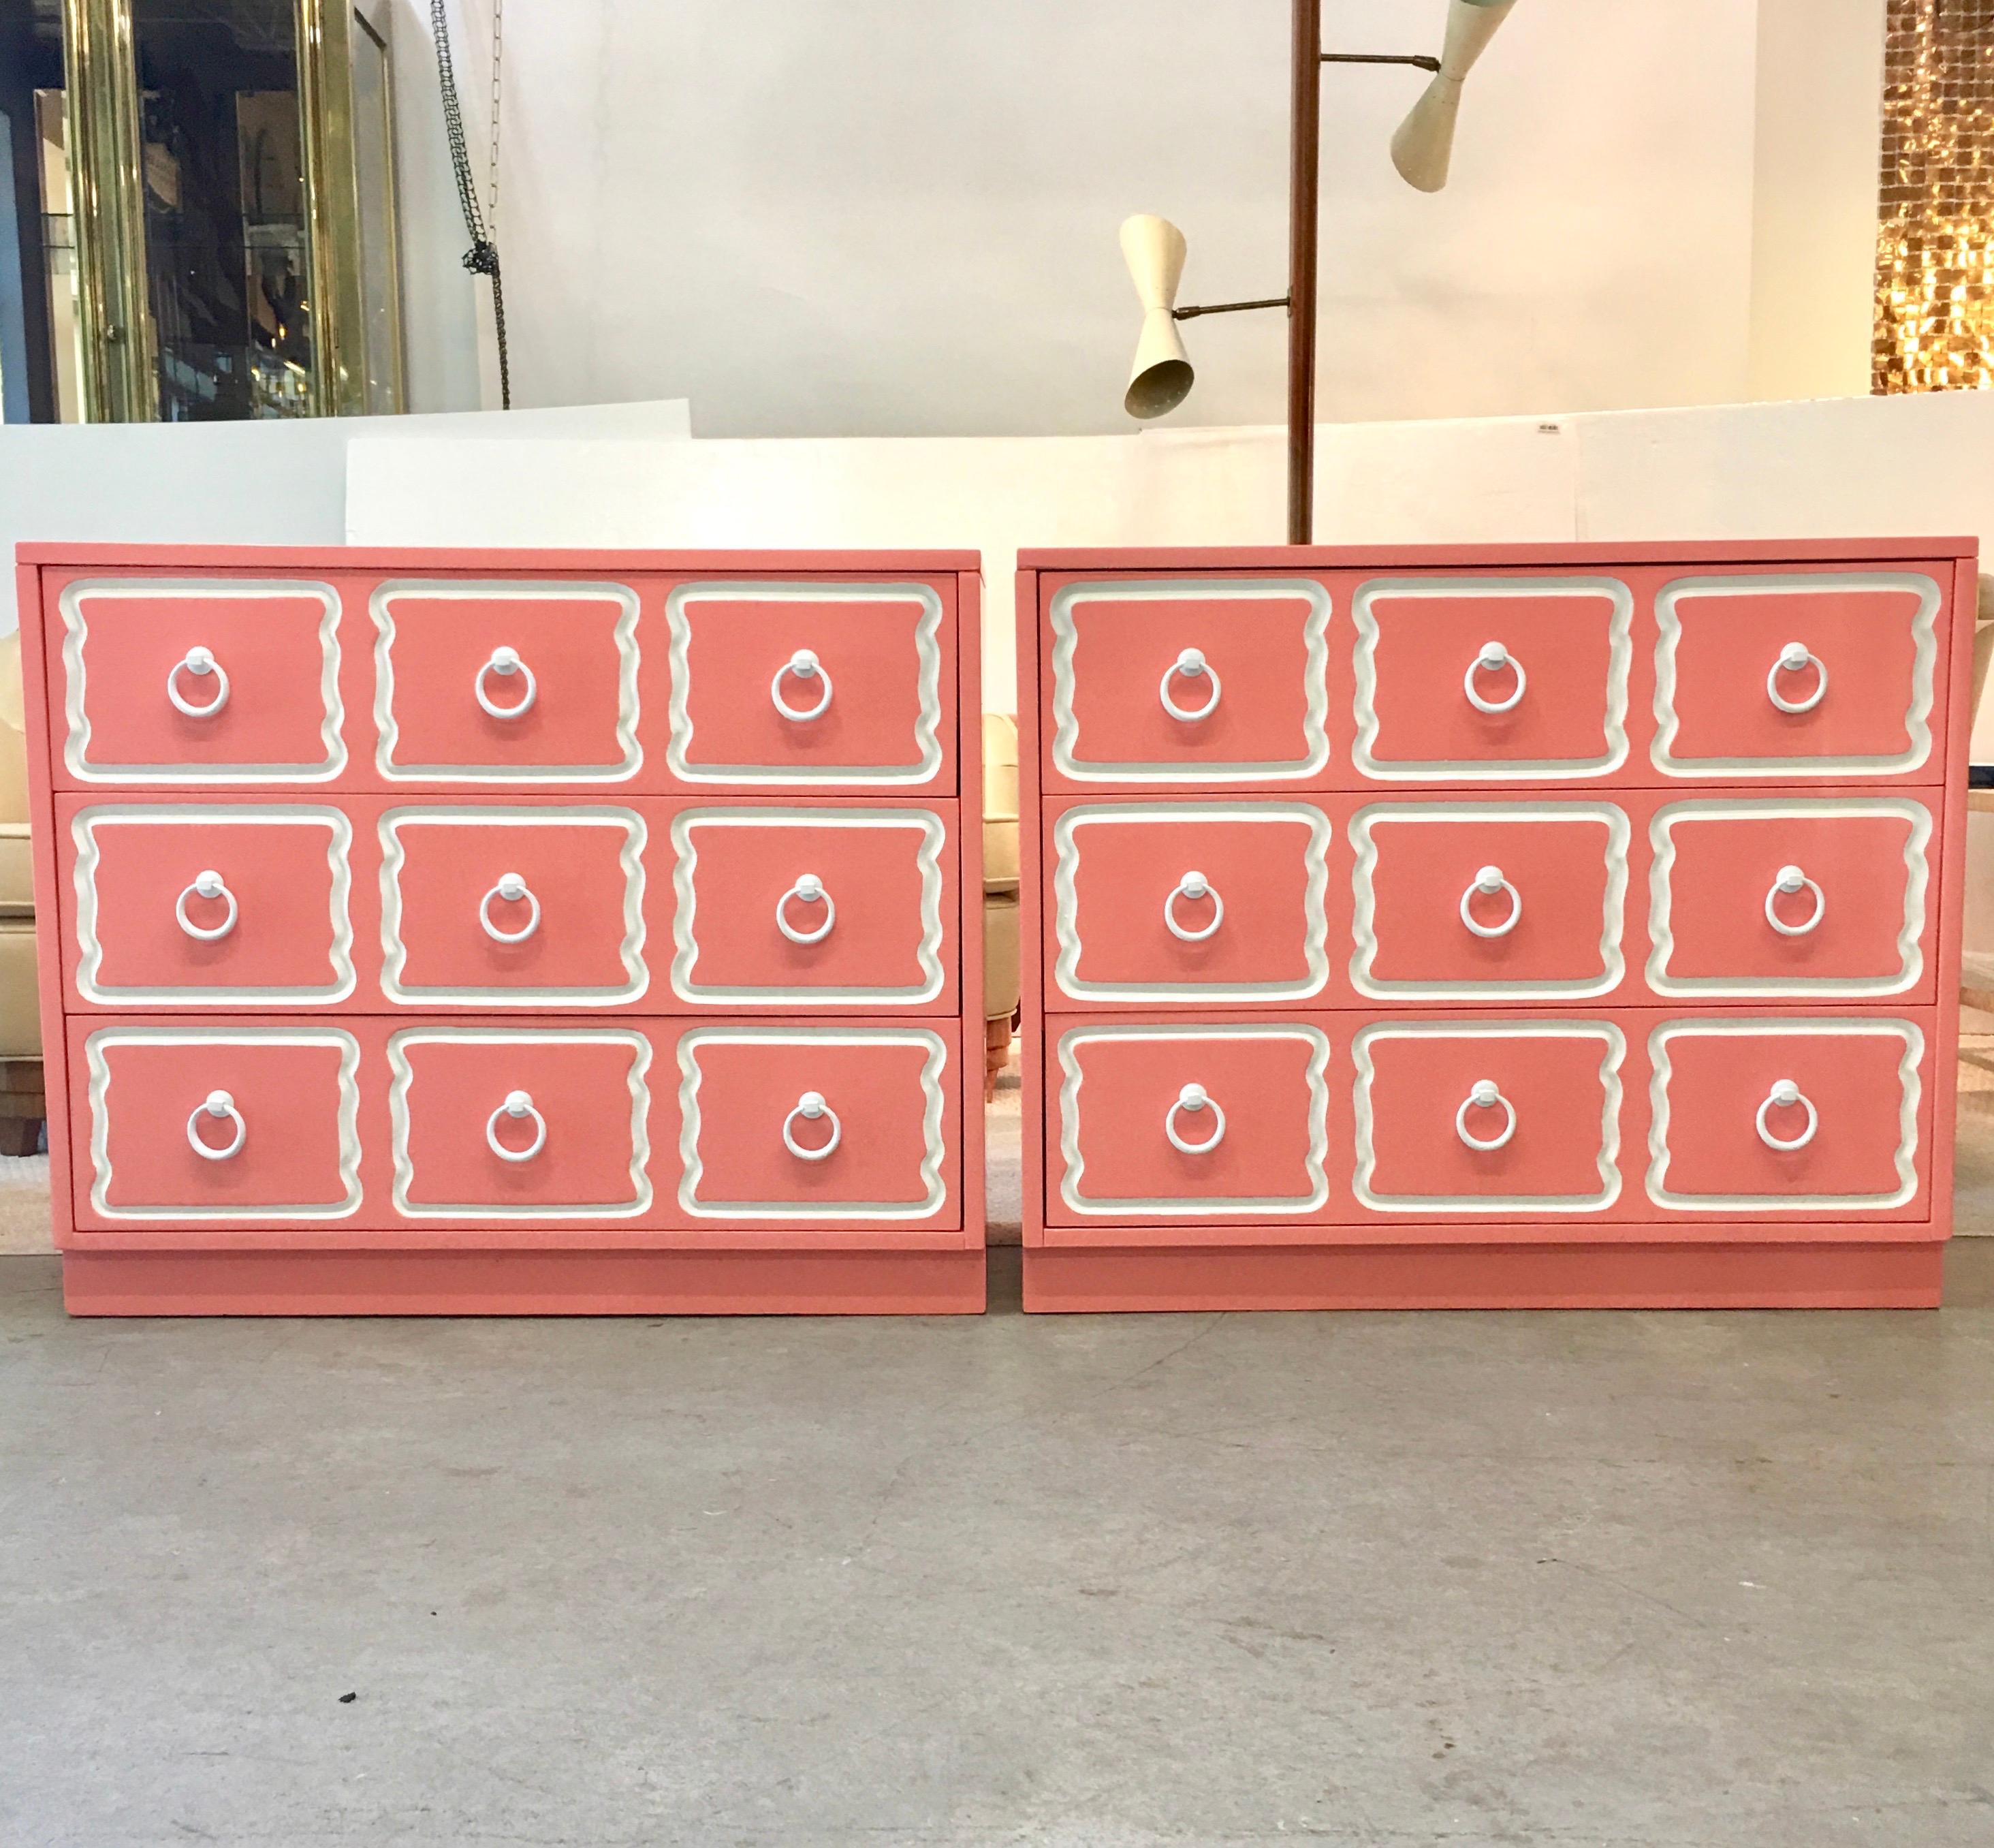 Pair of vintage Dorothy Draper style España bunching chests of three drawers which we have newly refinished in Lyford Cay pink, white trim and white powder coated original ring pulls. These are total sunshine on a rainy day. Great color: soft pink